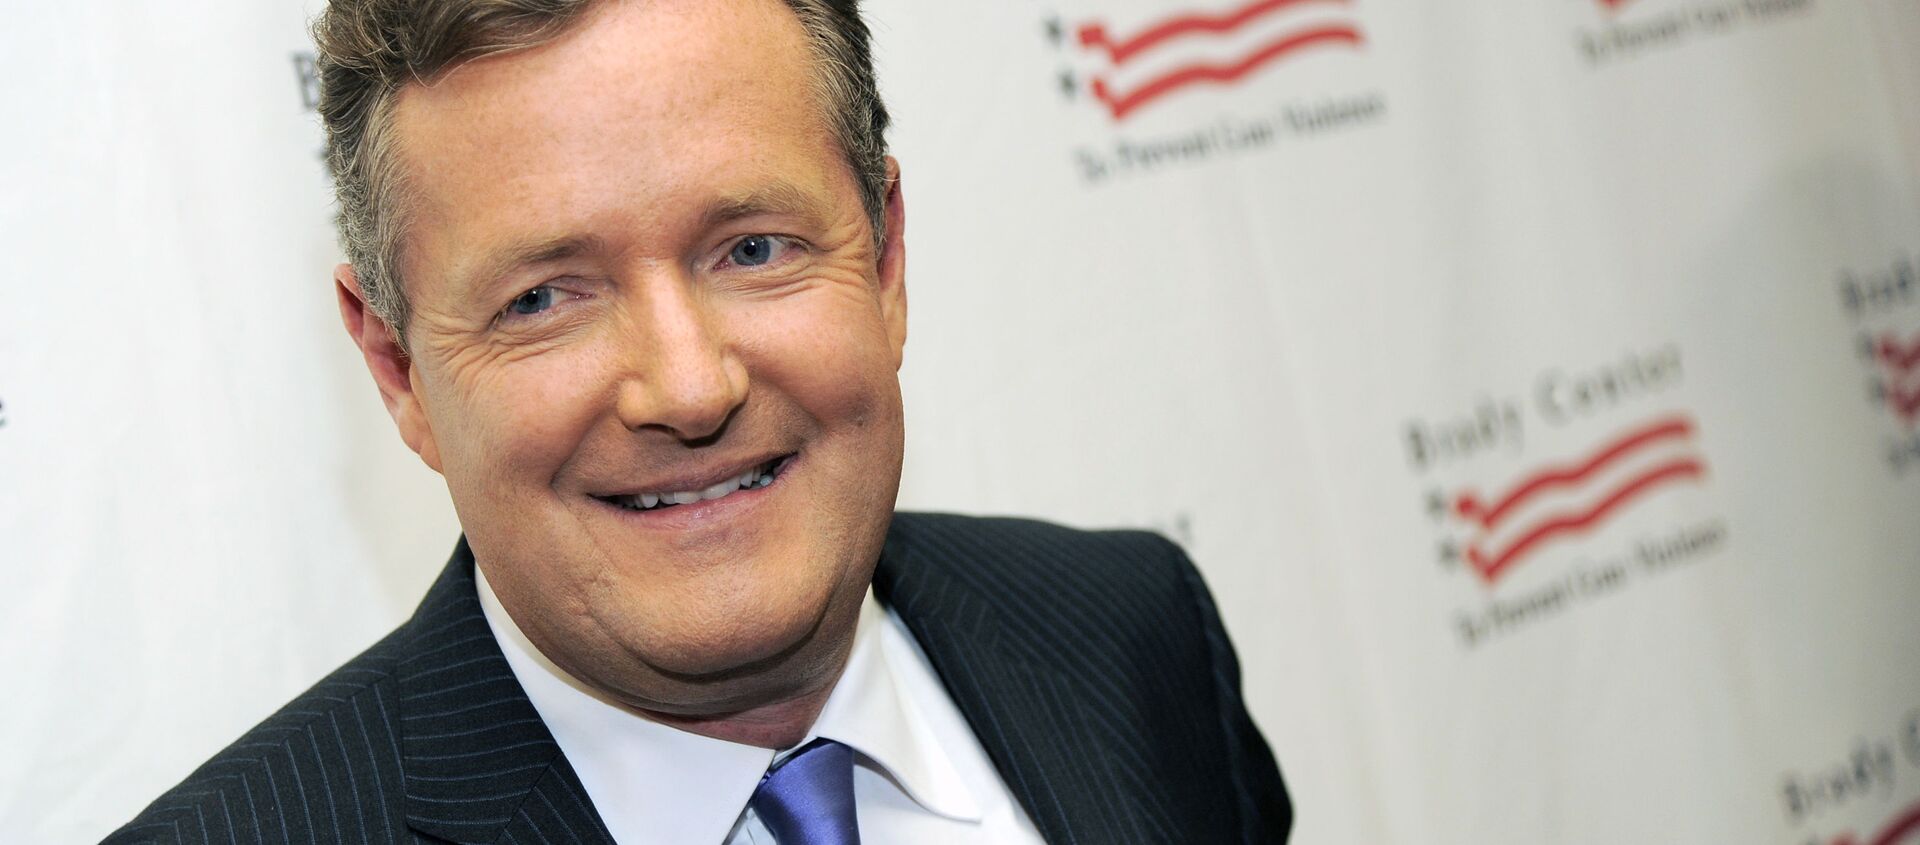  This May 7, 2013 file photo shows Piers Morgan at the Brady Campaign to Prevent Gun Violence Los Angeles Gala in Beverly Hills, Calif. - Sputnik International, 1920, 22.05.2021